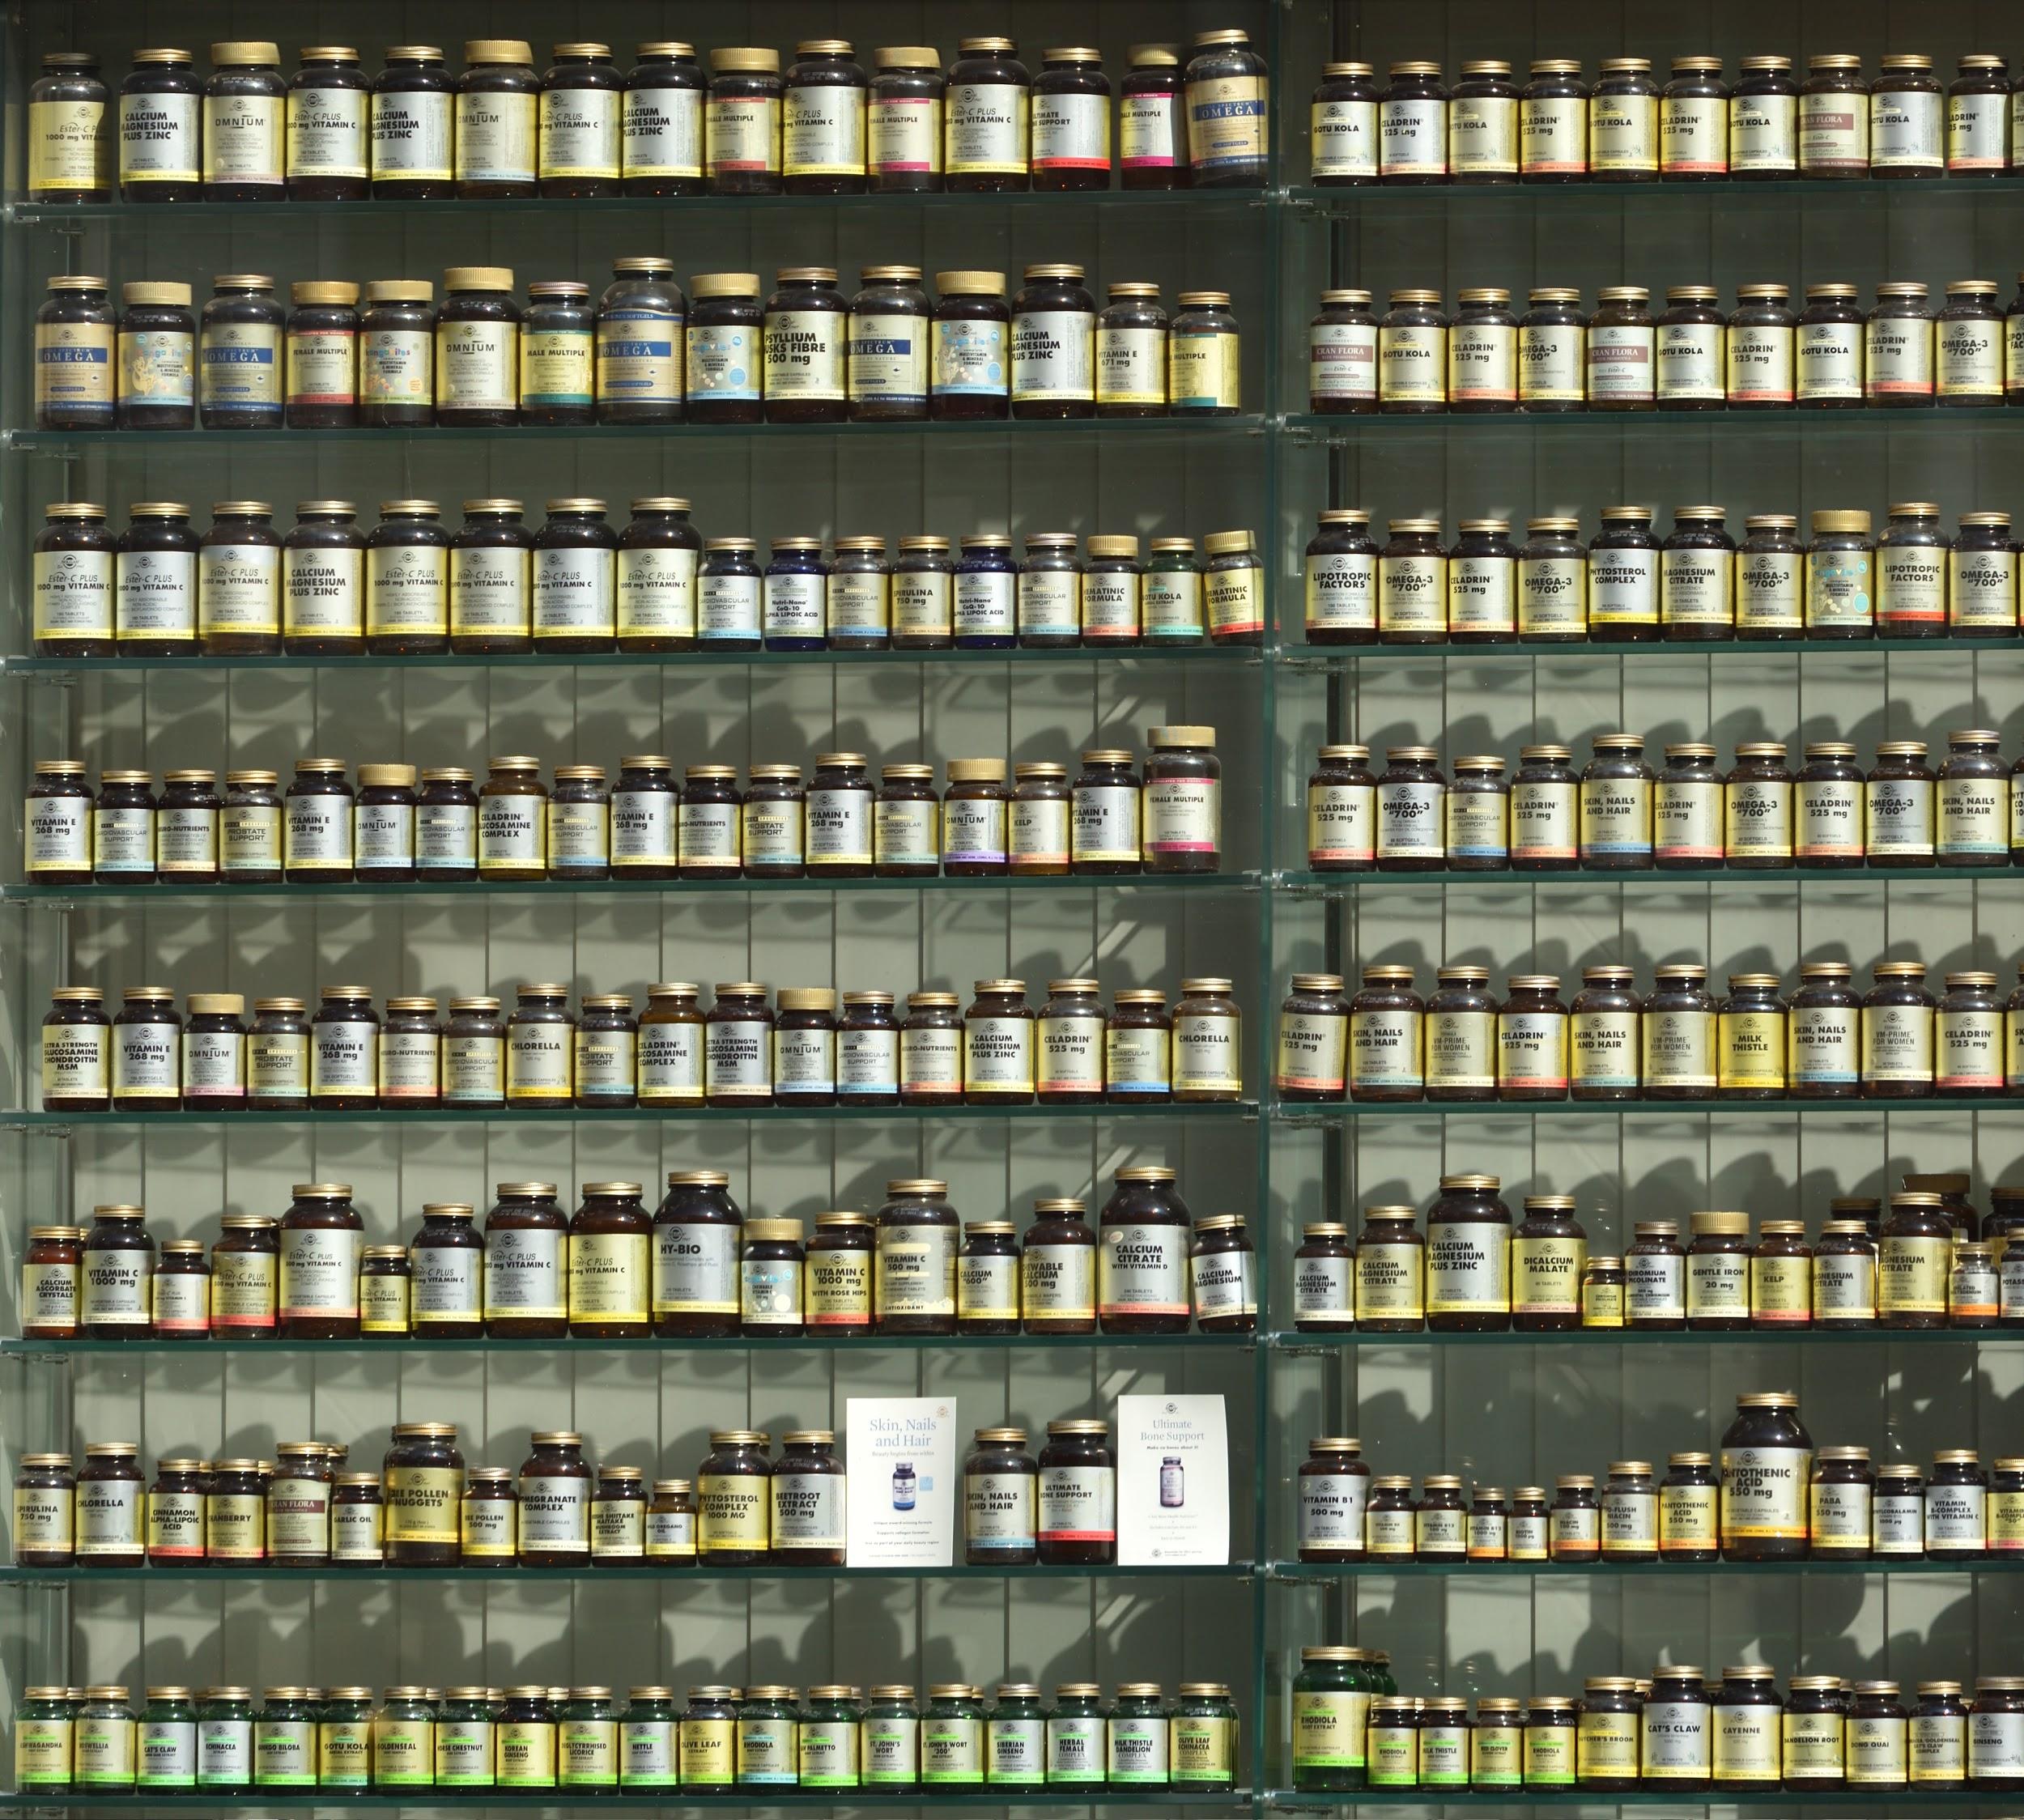 Rows and rows of different supplements.